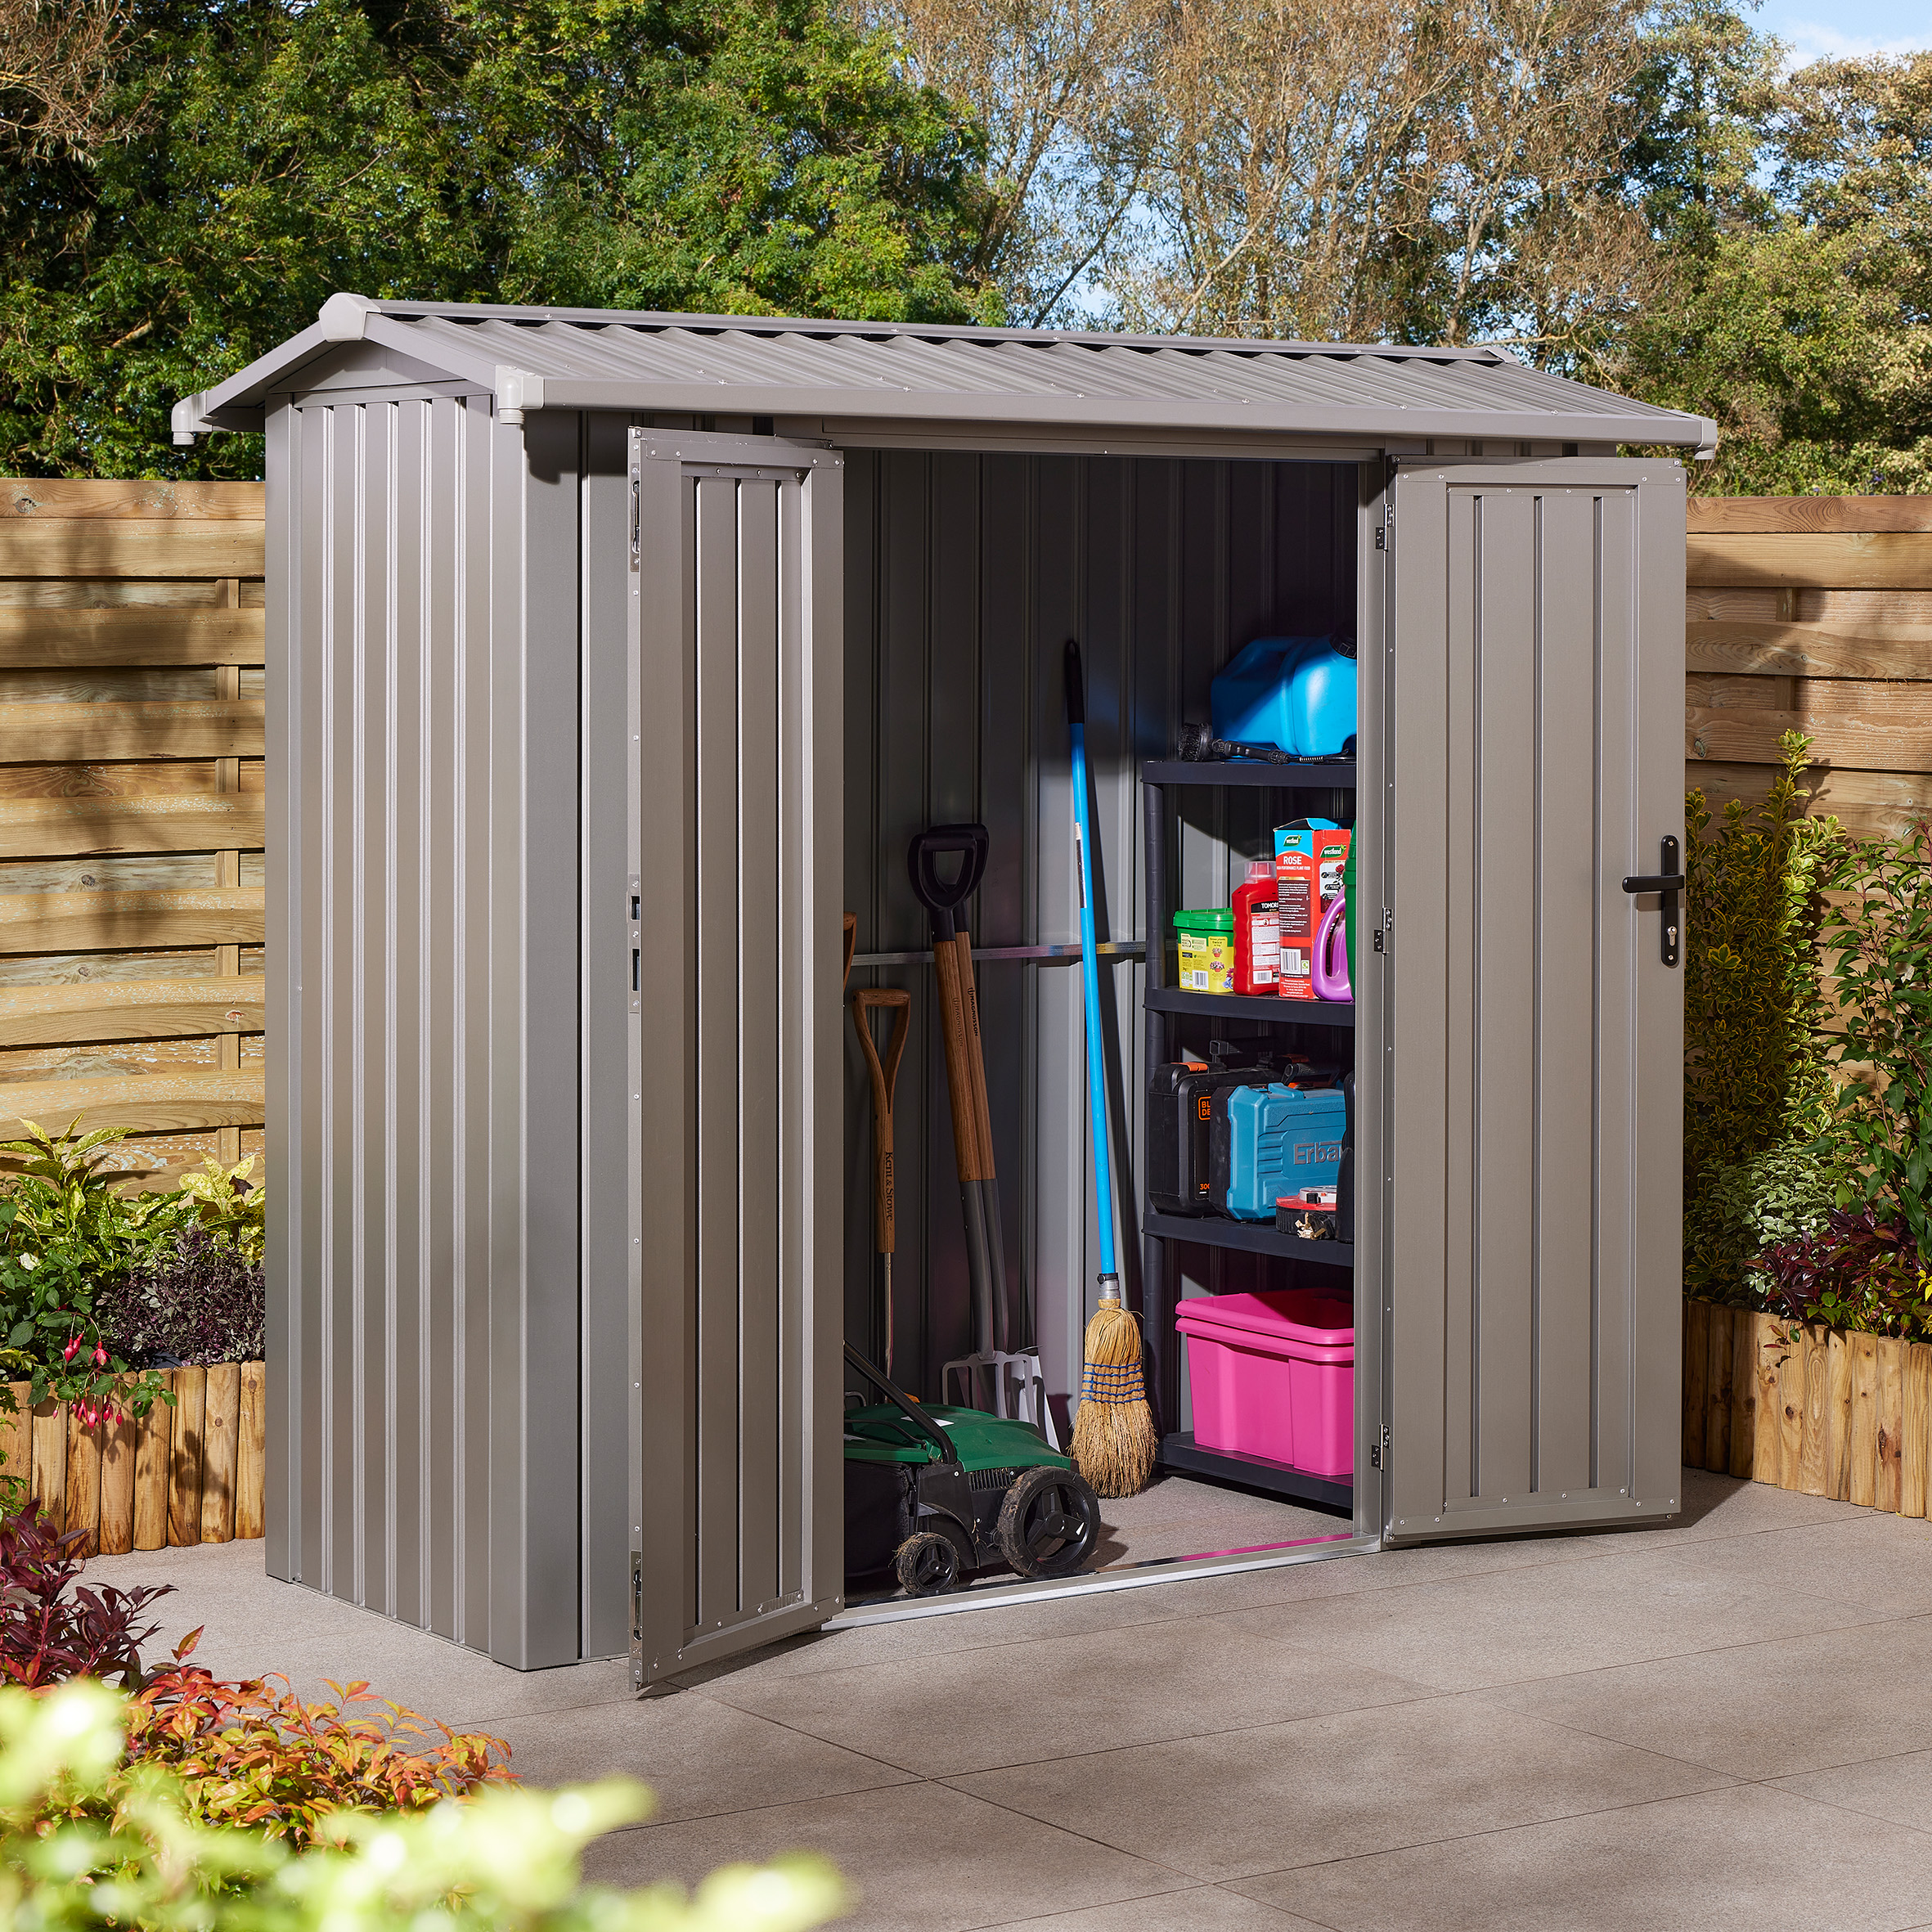 Featured image for “Brentvale Premium 8x4 Metal Shed”